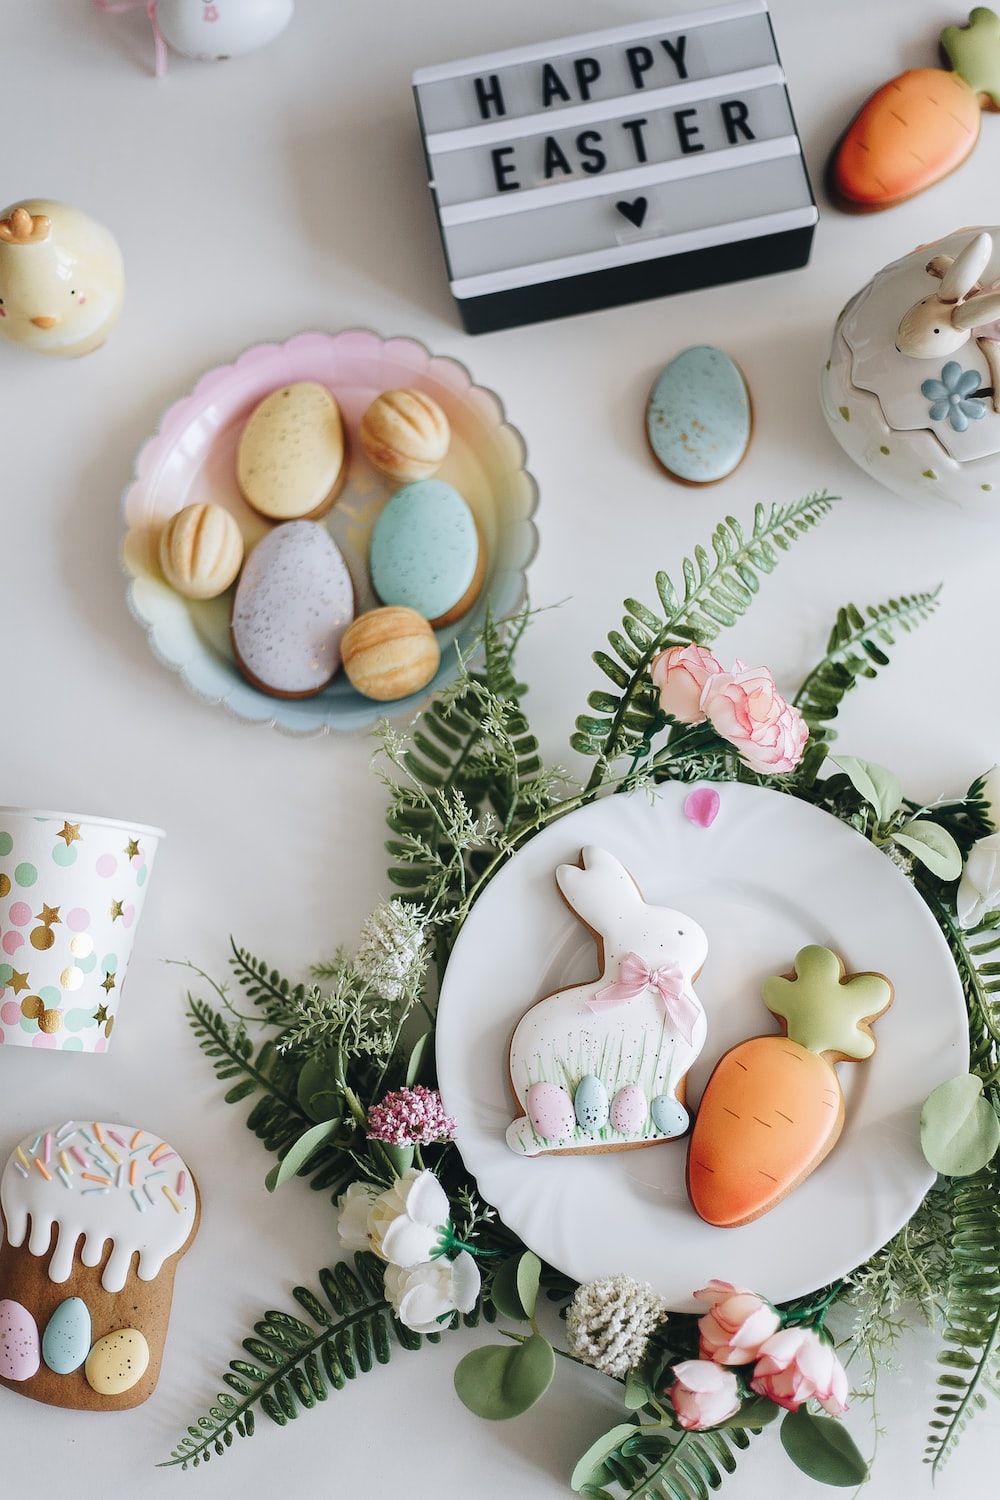 Easter table setting with bunny and carrot shaped cookies, macarons and a sign that says Happy Easter - Easter